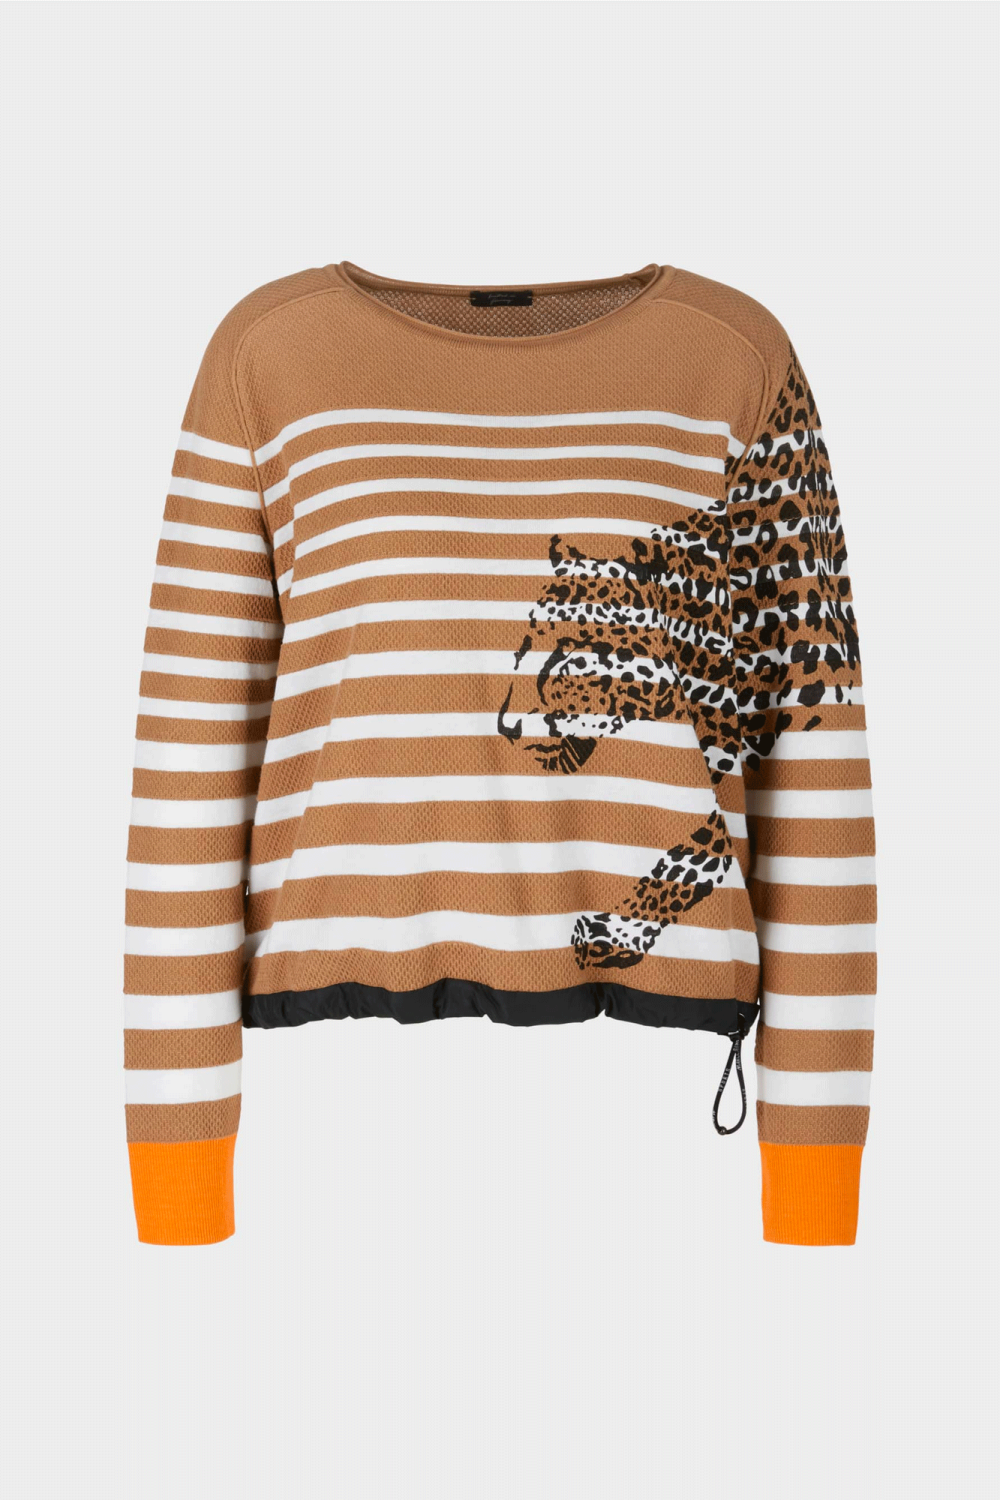 Stay warm and stylish in our Bold Types Bold Stripe Tiger Sweater from Marc Cain.